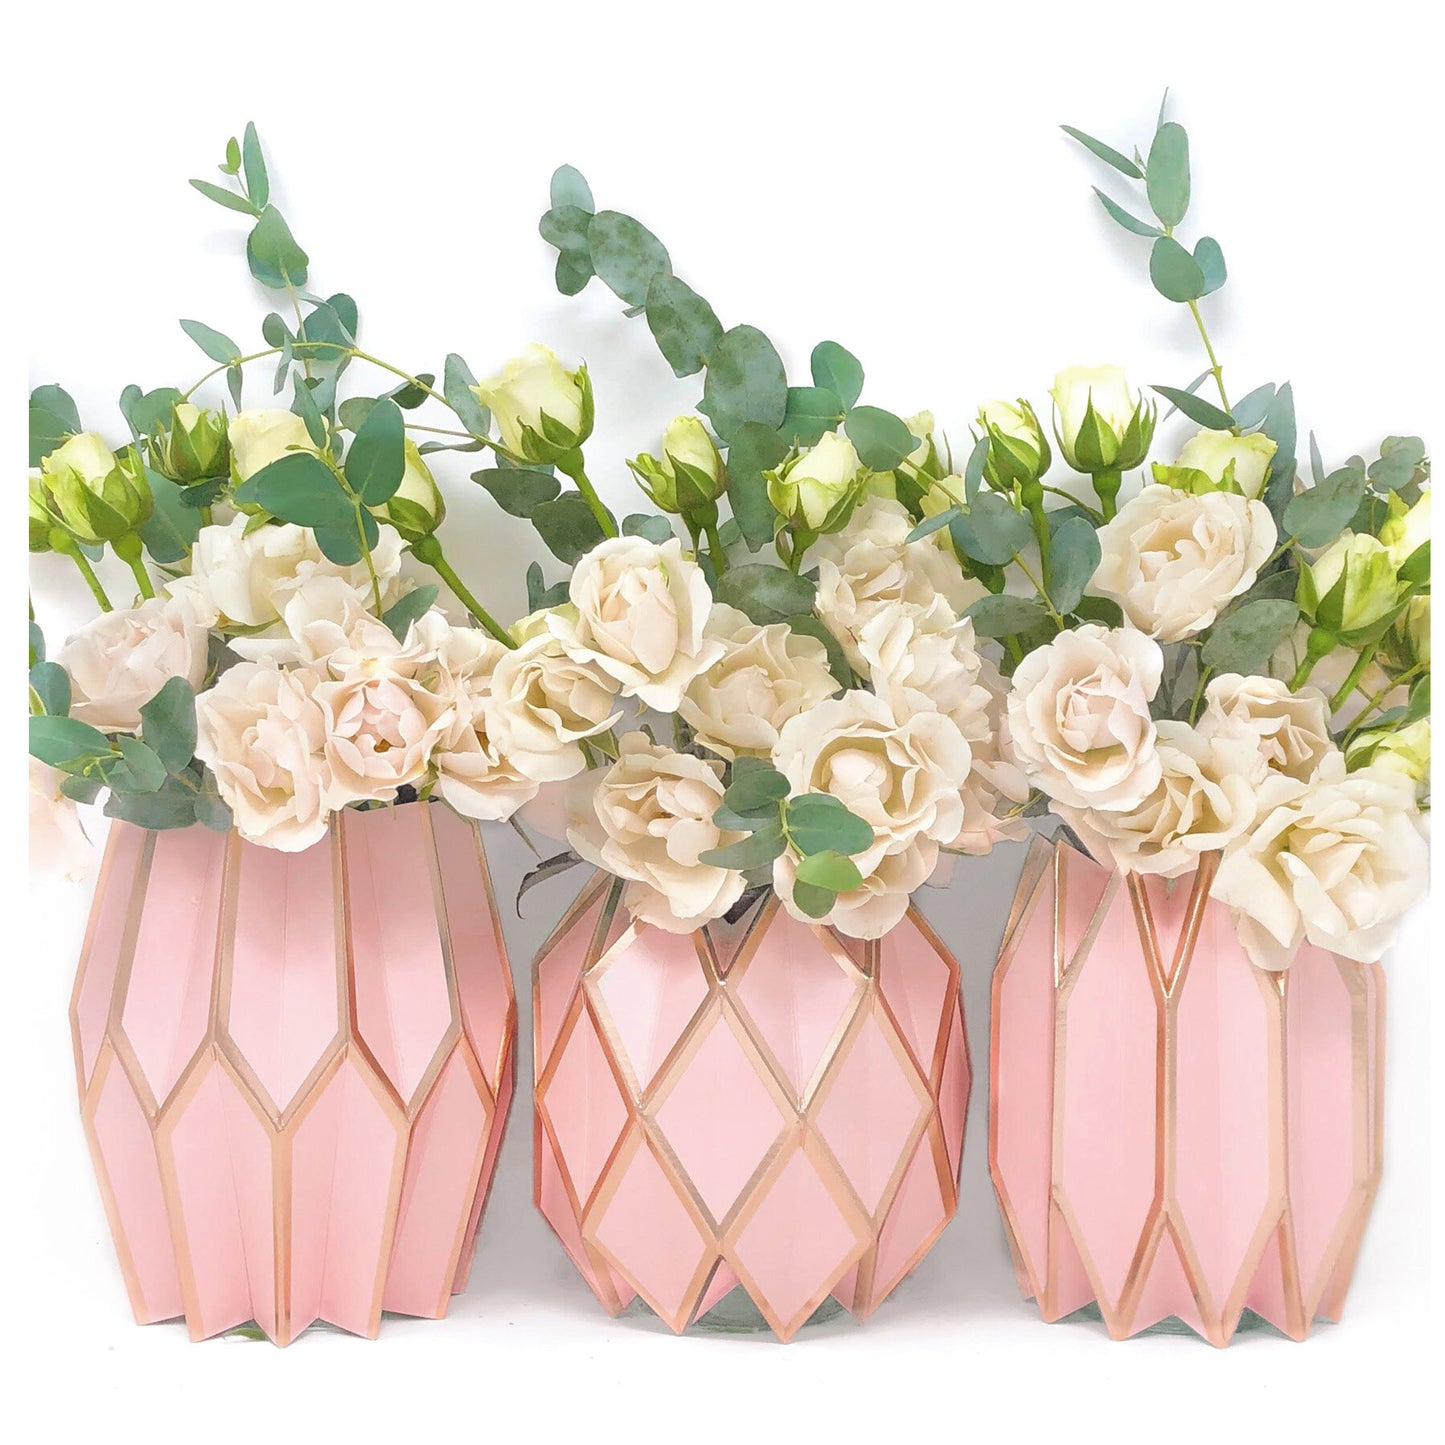 Pink and rose gold paper sleeve vases with white roses